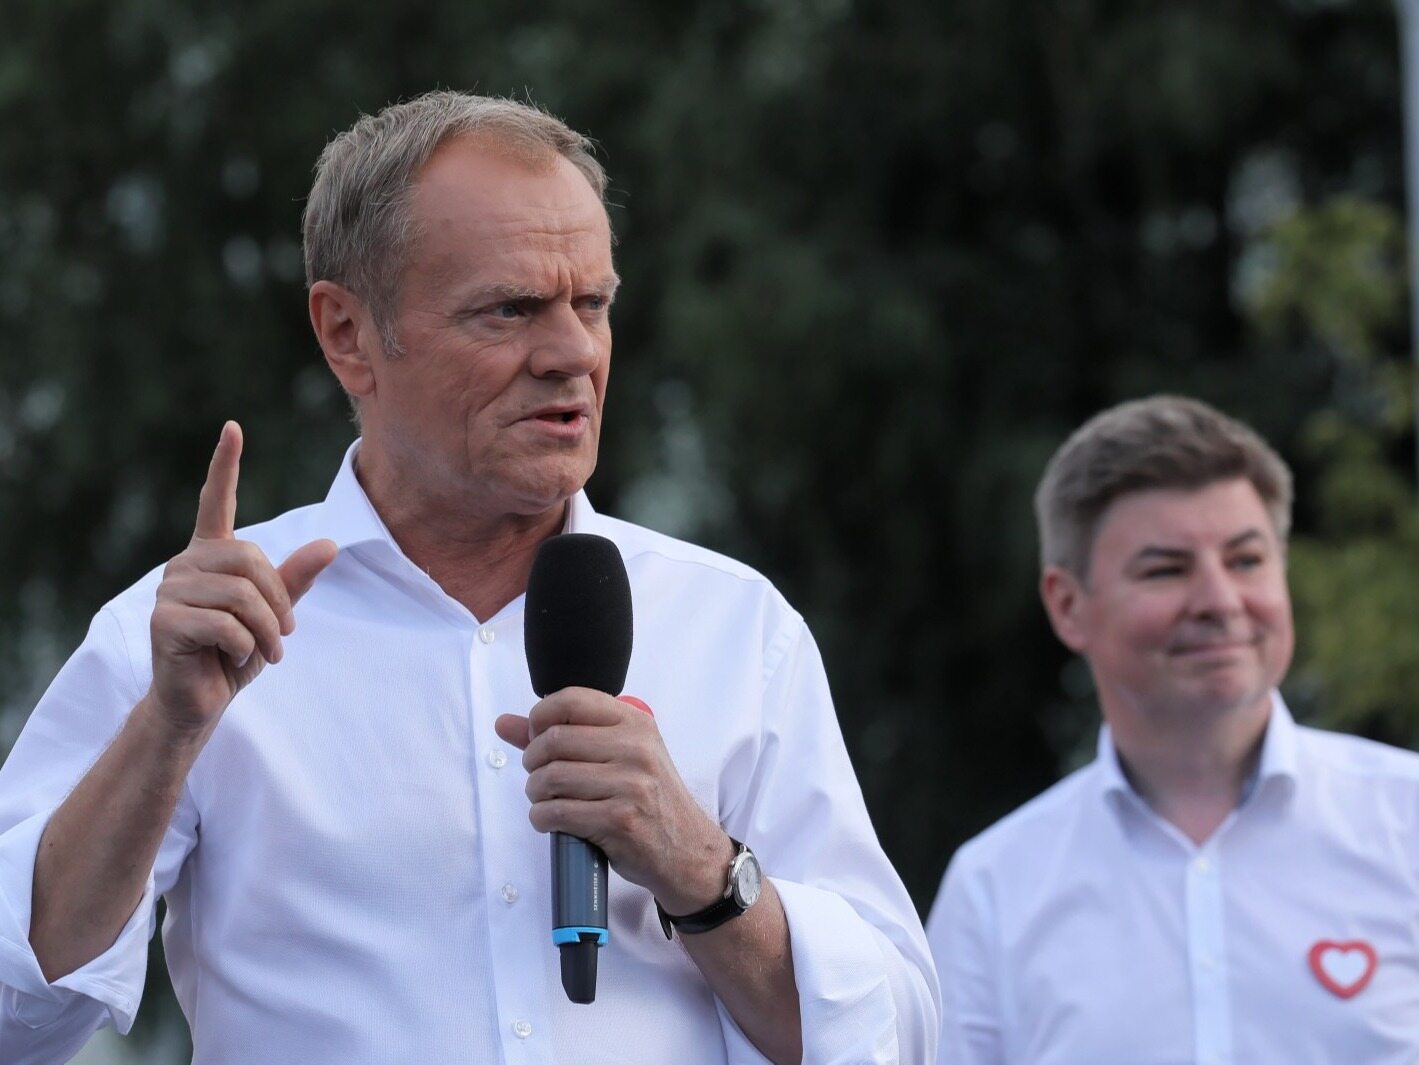 Famous members and a new face.  Tusk announced KO candidates in Mazovia